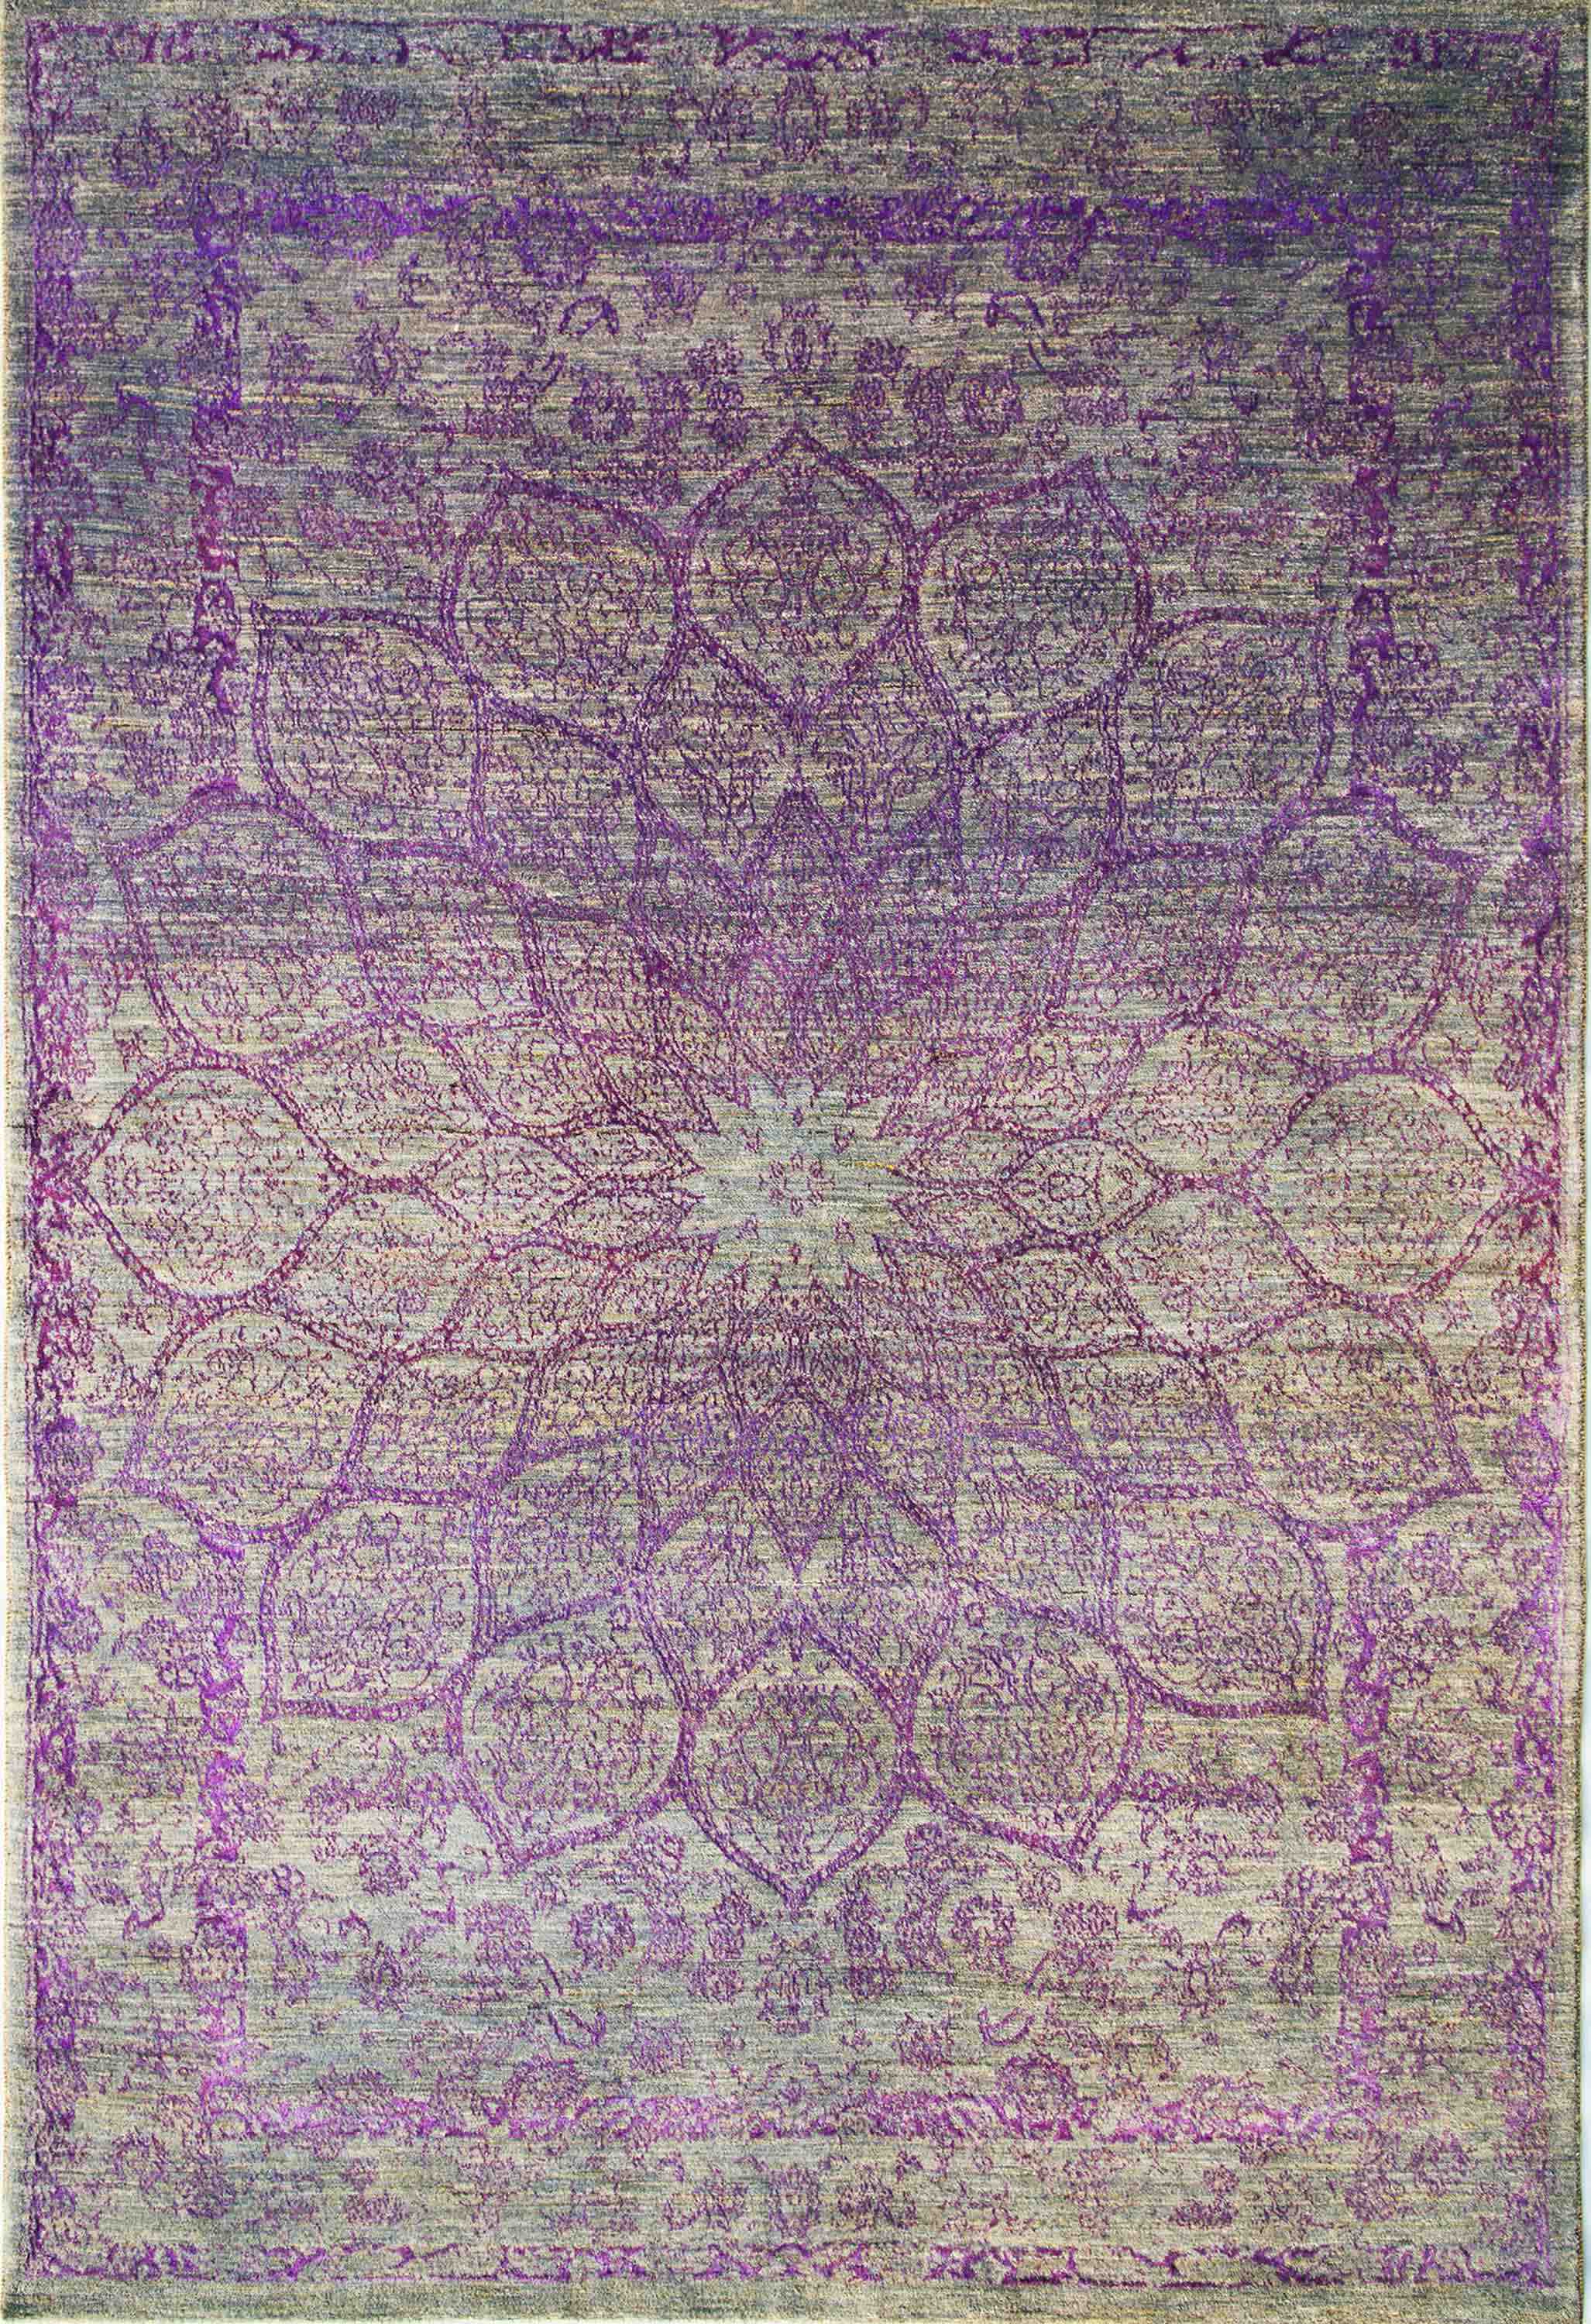 Gloss, Violet, Designer Isfahan Collection, ZSFG, 200 x 300 cm